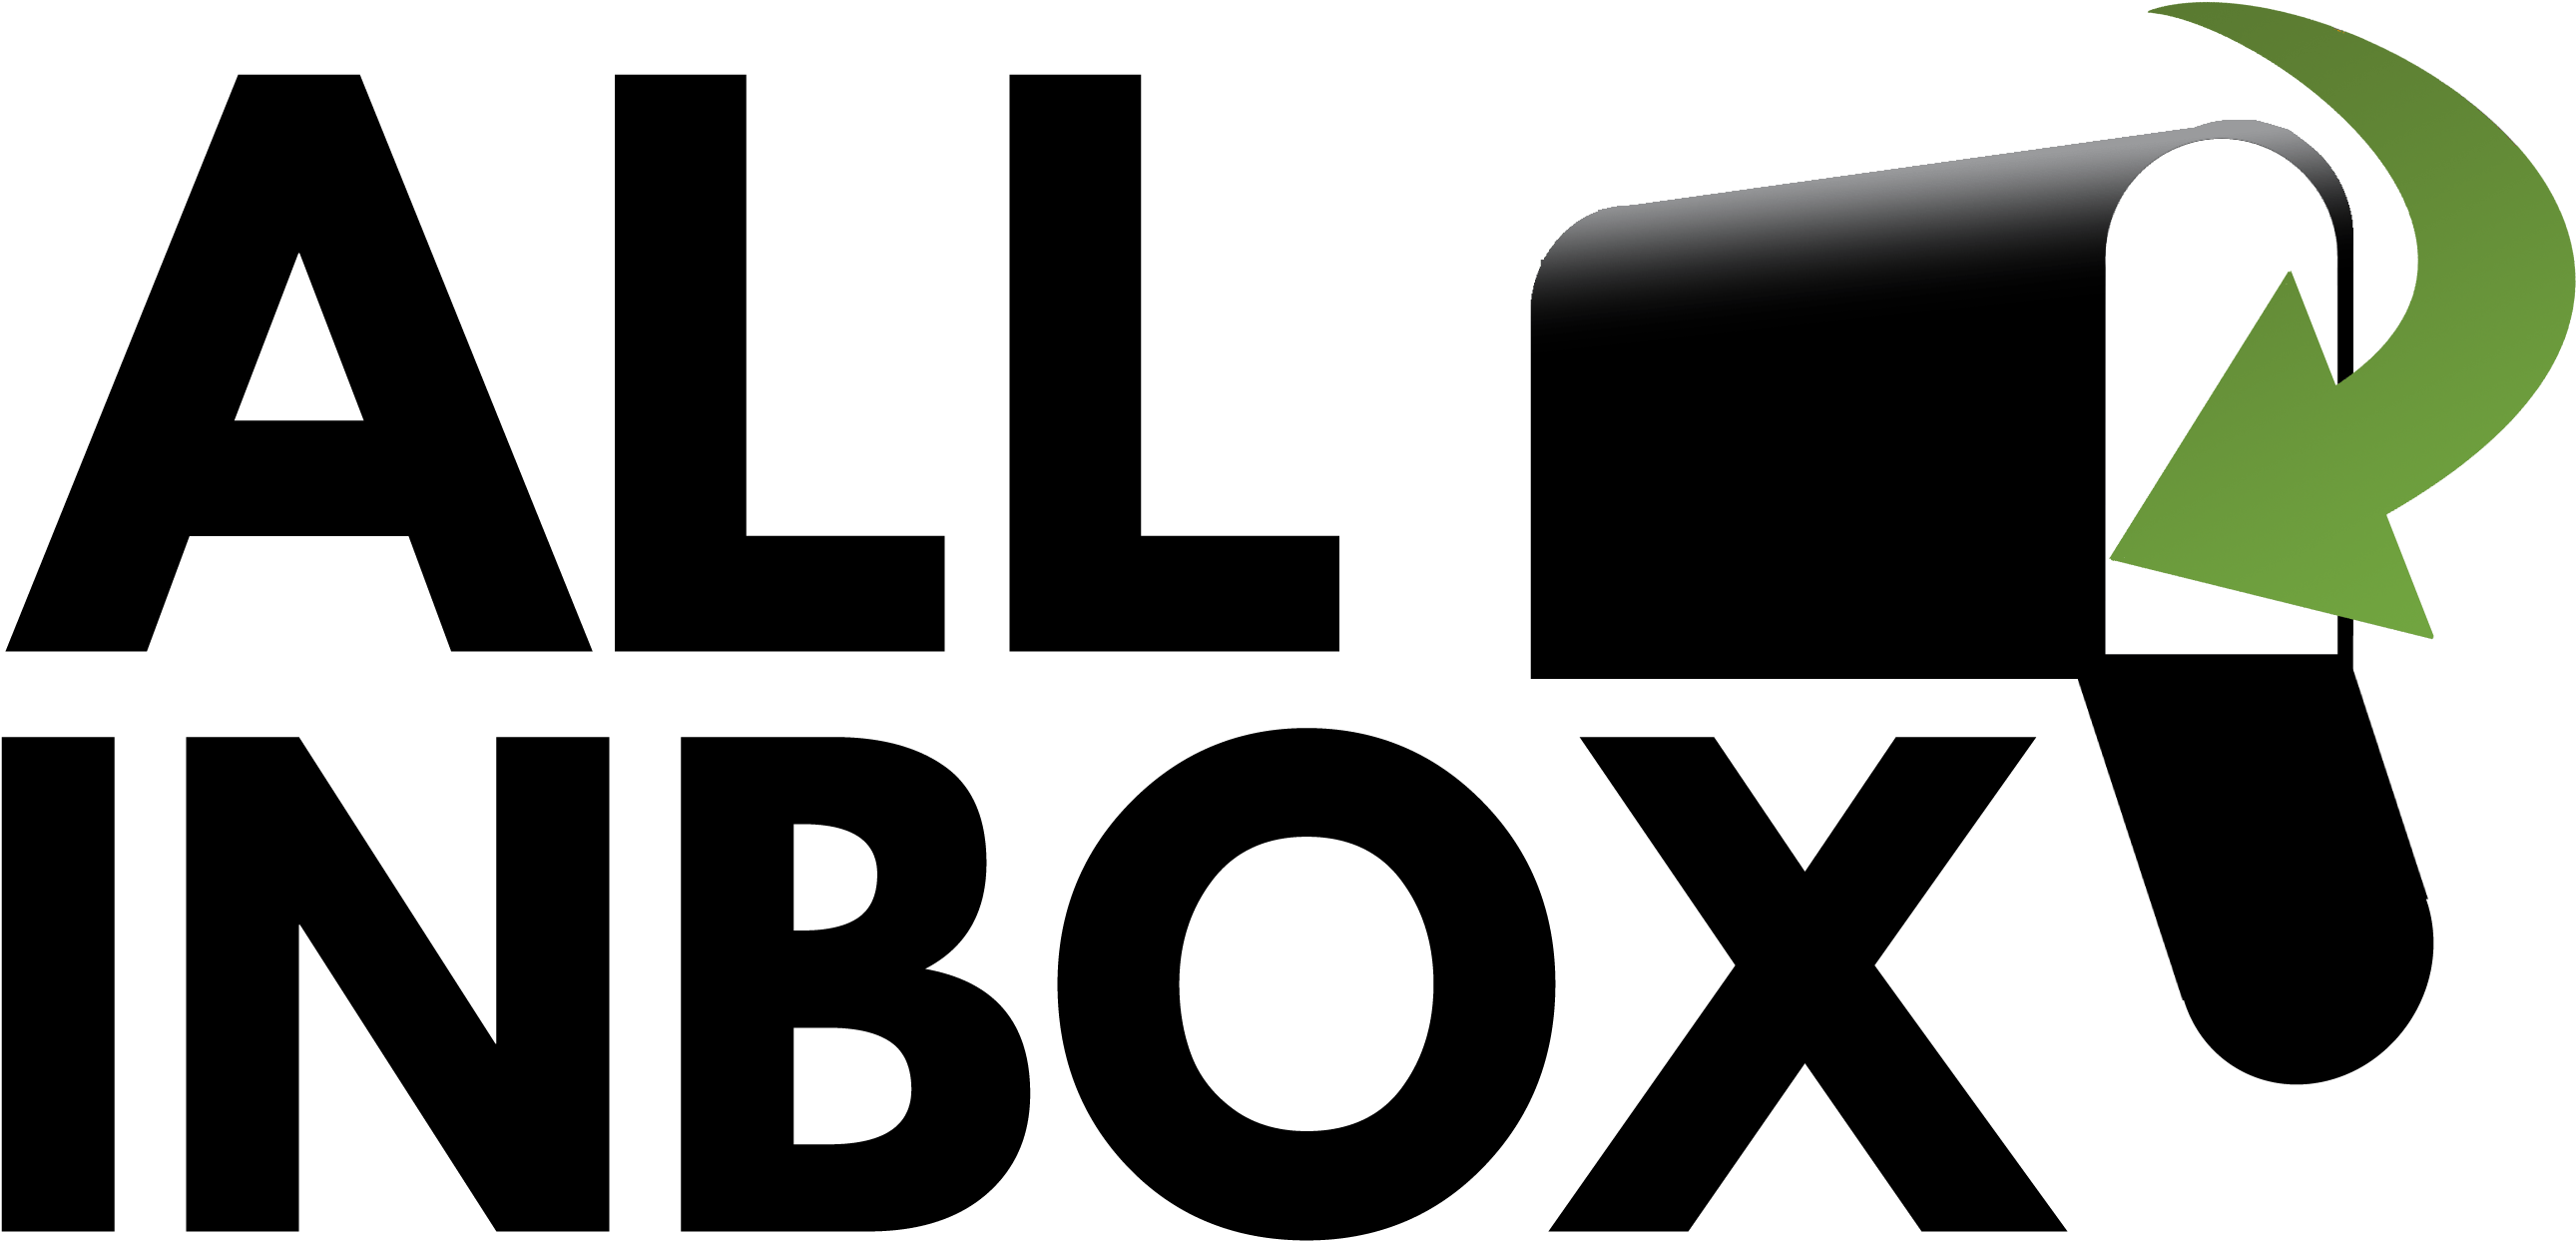 A Black Background With A White Object